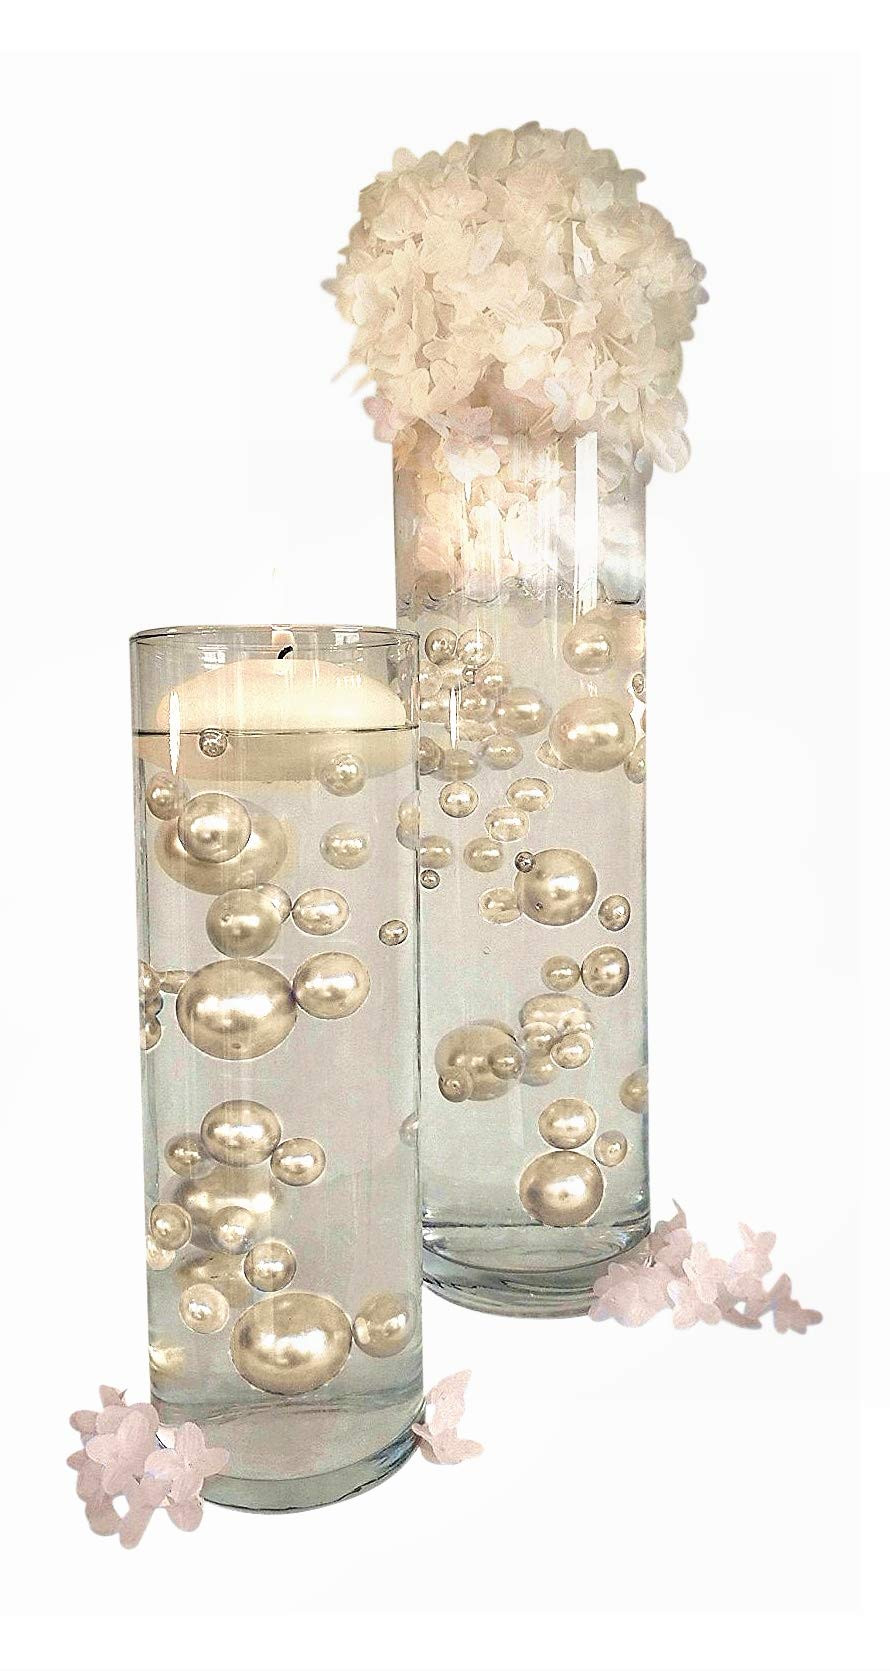 27 Unique Floating Candle Vases Centerpieces 2024 free download floating candle vases centerpieces of best floating pearls for centerpieces amazon com in floating no hole ivory pearls jumbo assorted sizes vase fillers for centerpieces decorations include